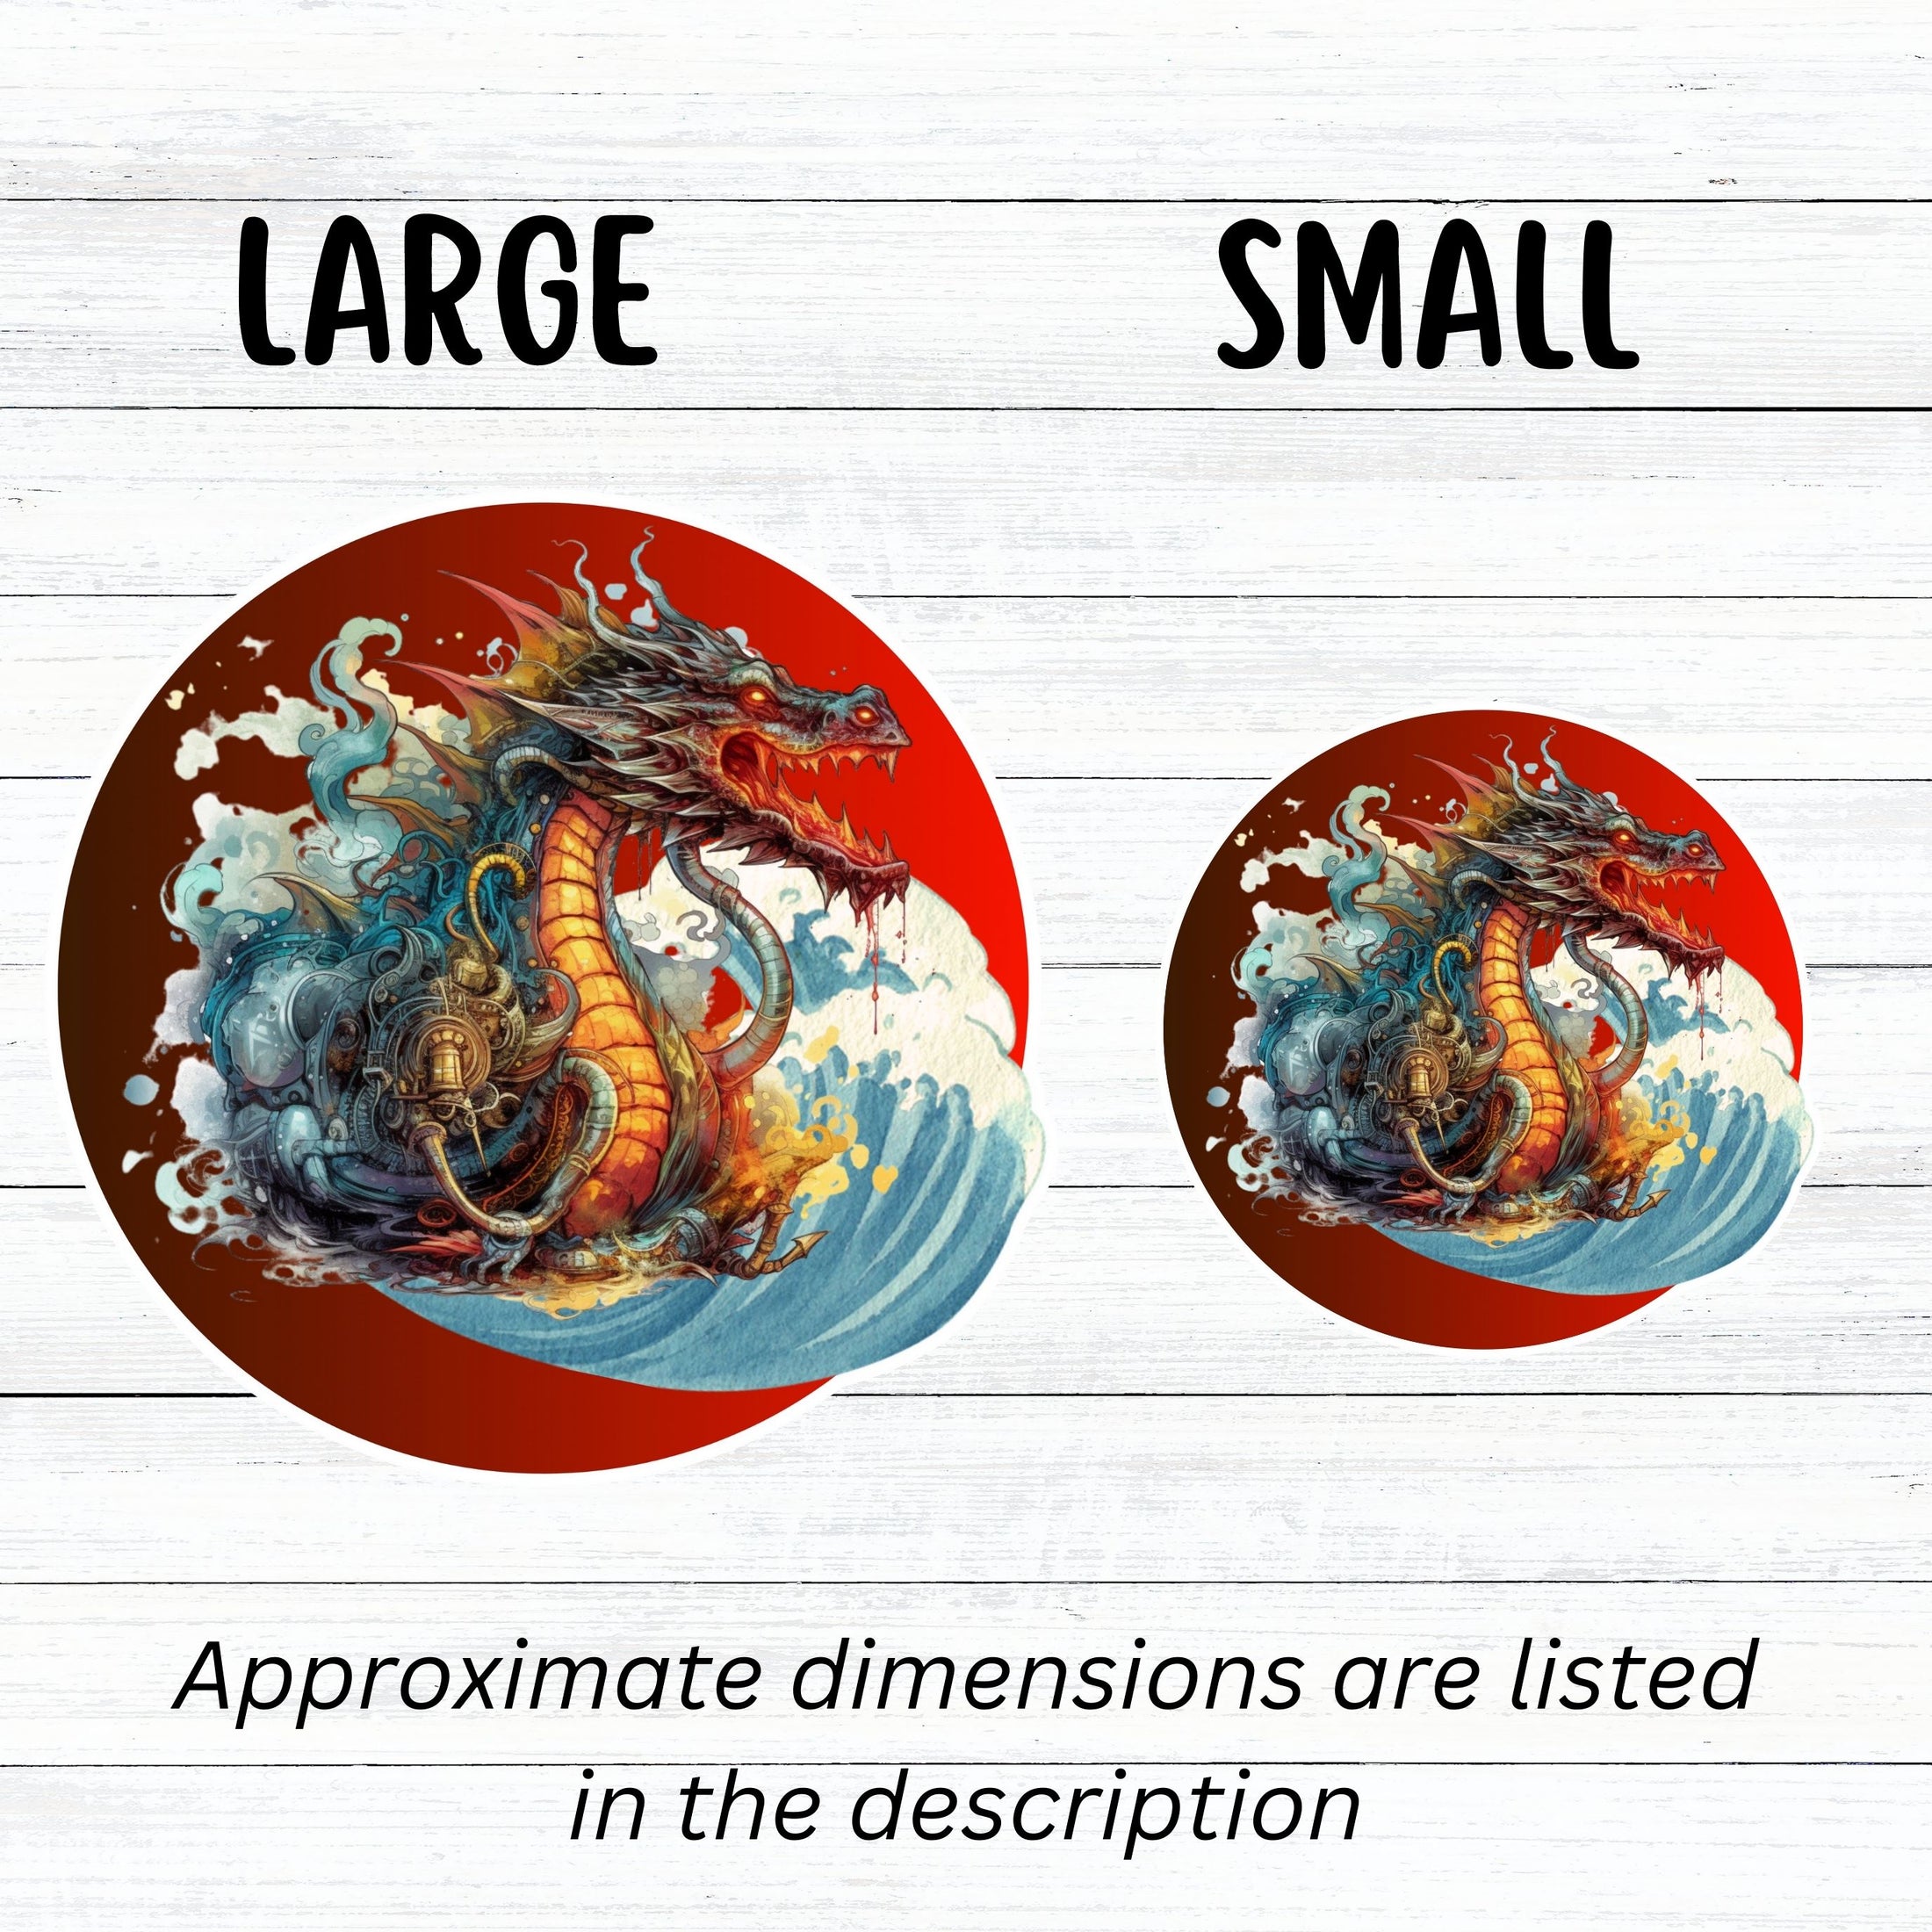 This image shows large and small steampunk Japanese dragon stickers next to each other.